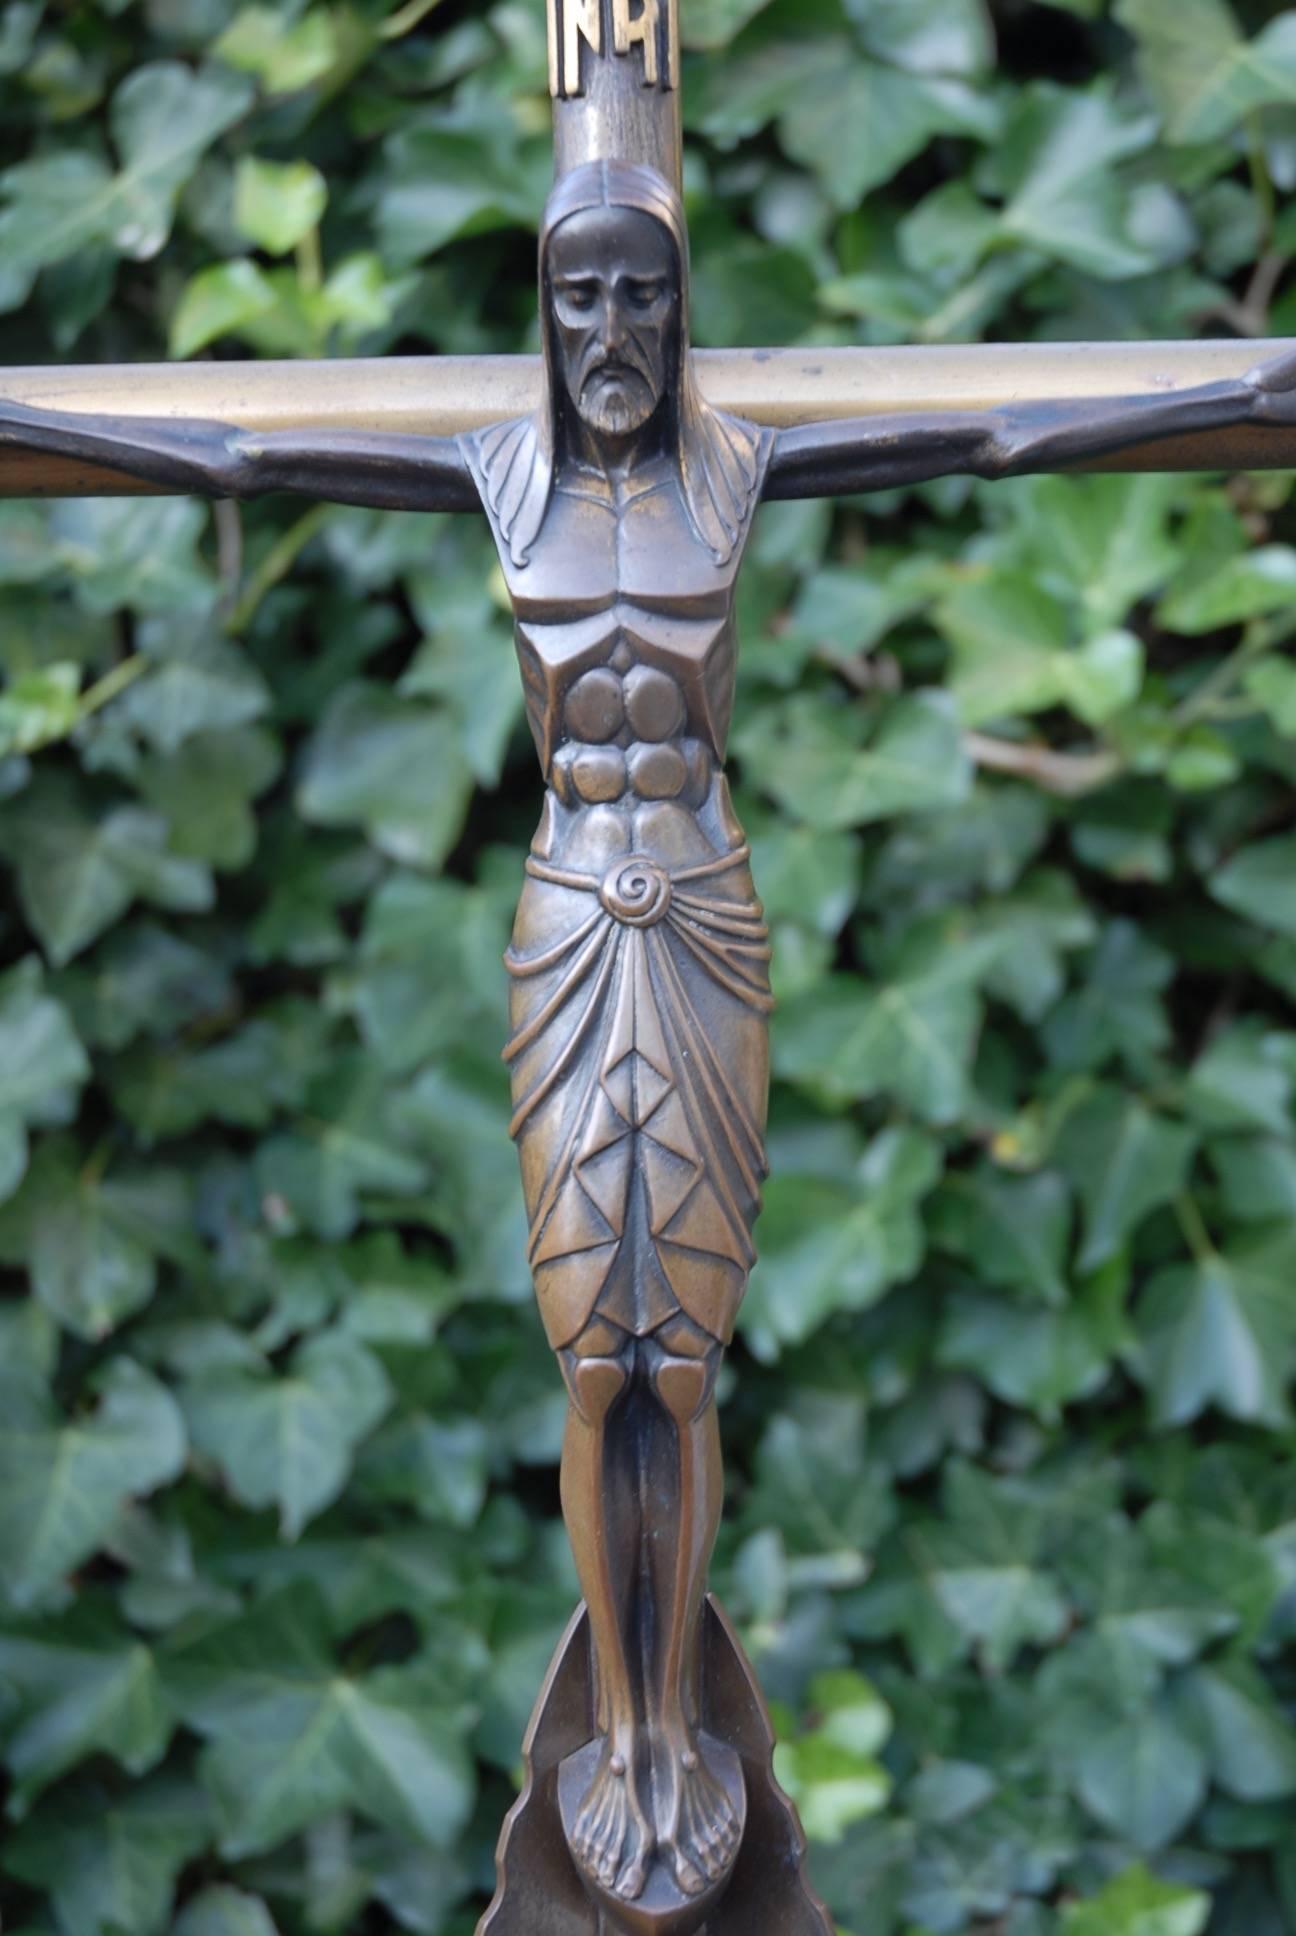 Rare crucifix and a wonderful Art Deco work of religious art.

It will be very difficult to ever find a more beautifully designed and geometrically and symmetrically perfect, Art Deco Christ sculpture. This truly is a stunning and impressive work of